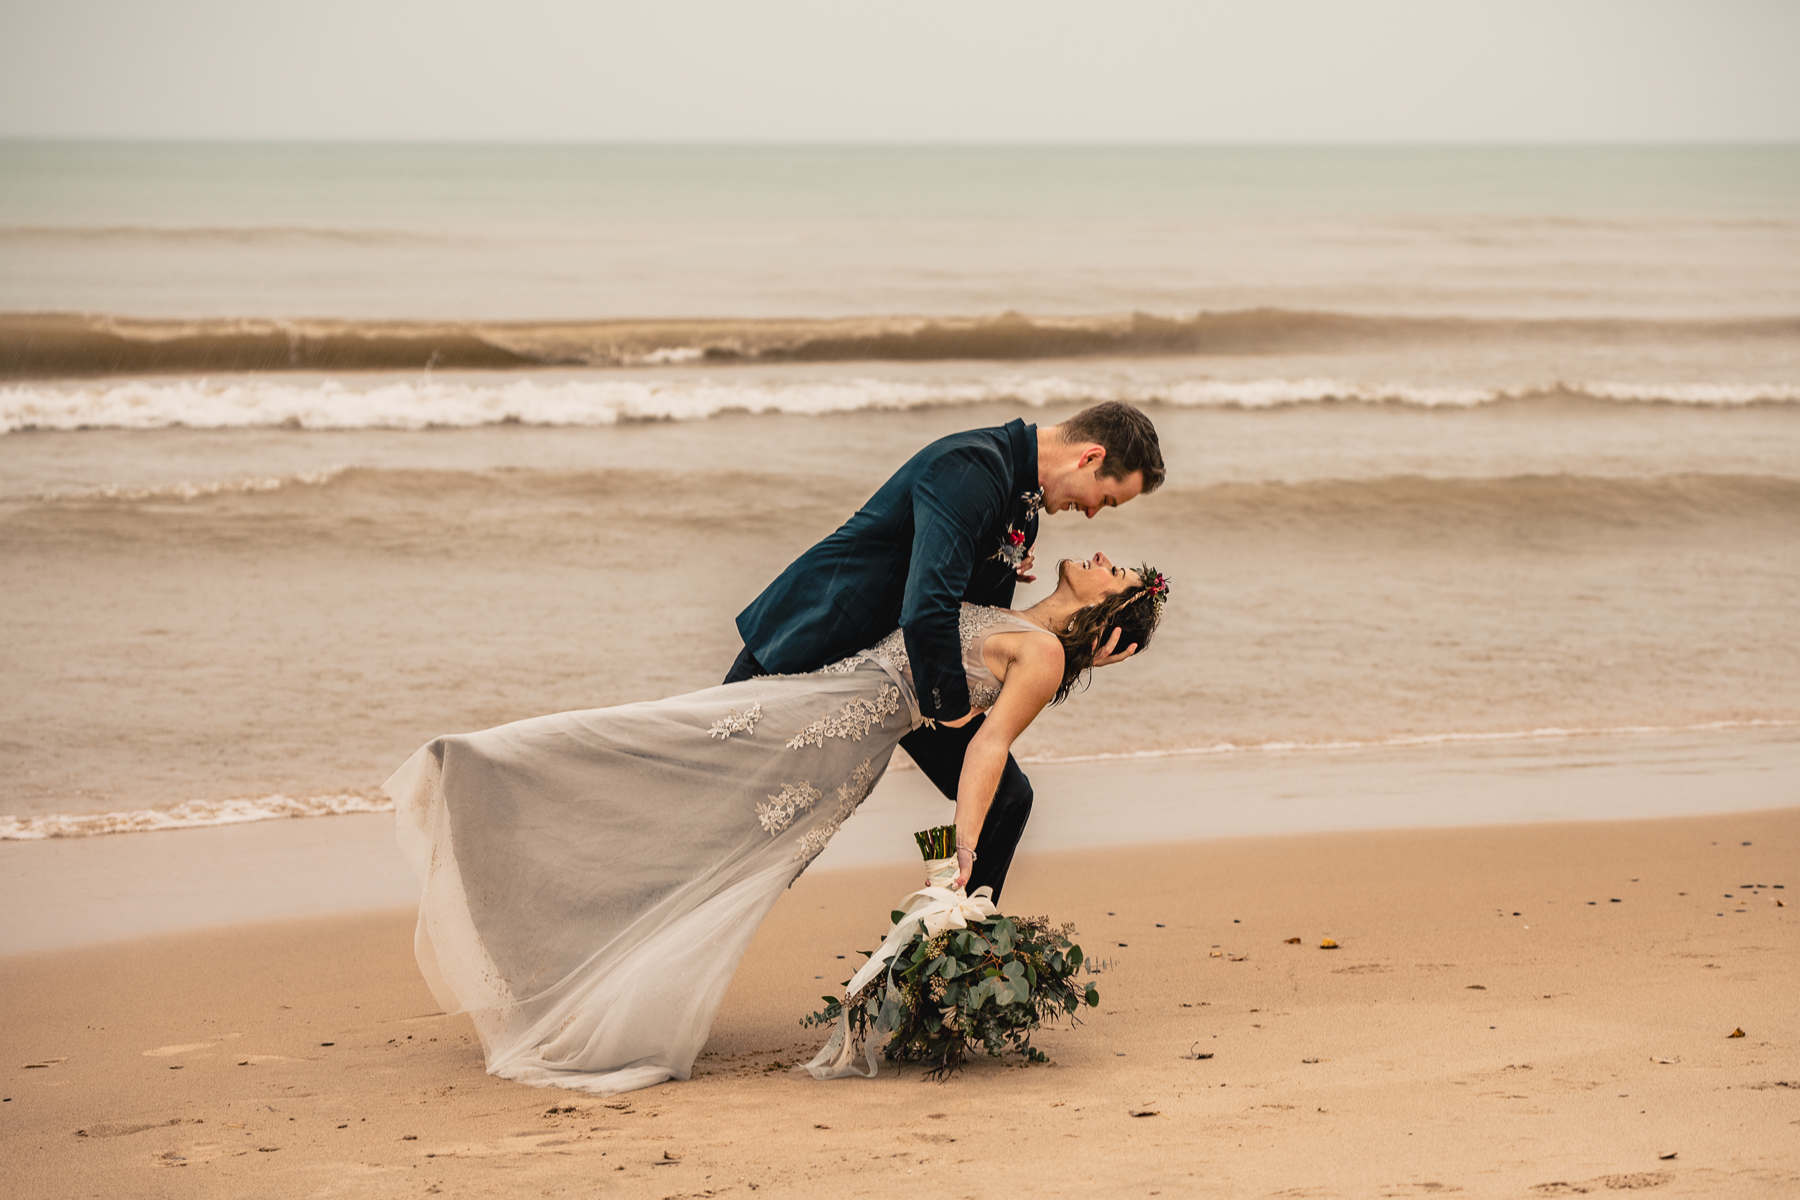 The groom dips the bride as the waves roll in along the beach in this Wisconsin elopement